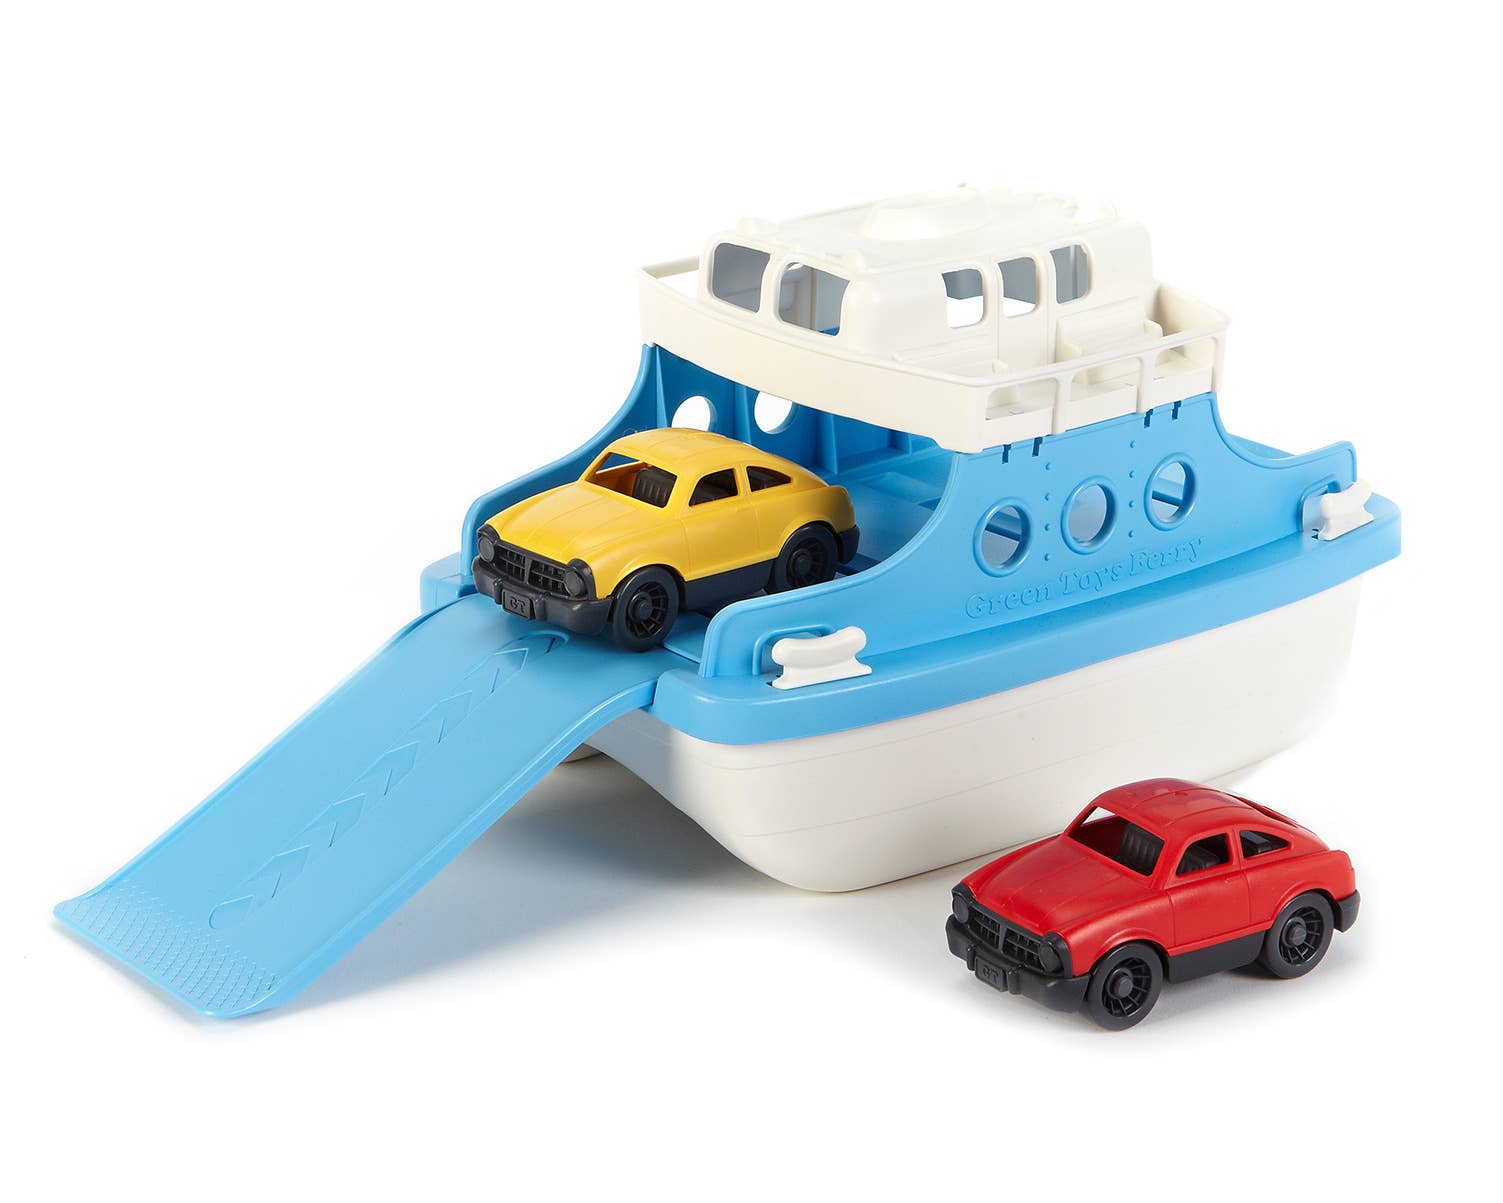 Ferry Boat Toy - Blue/White